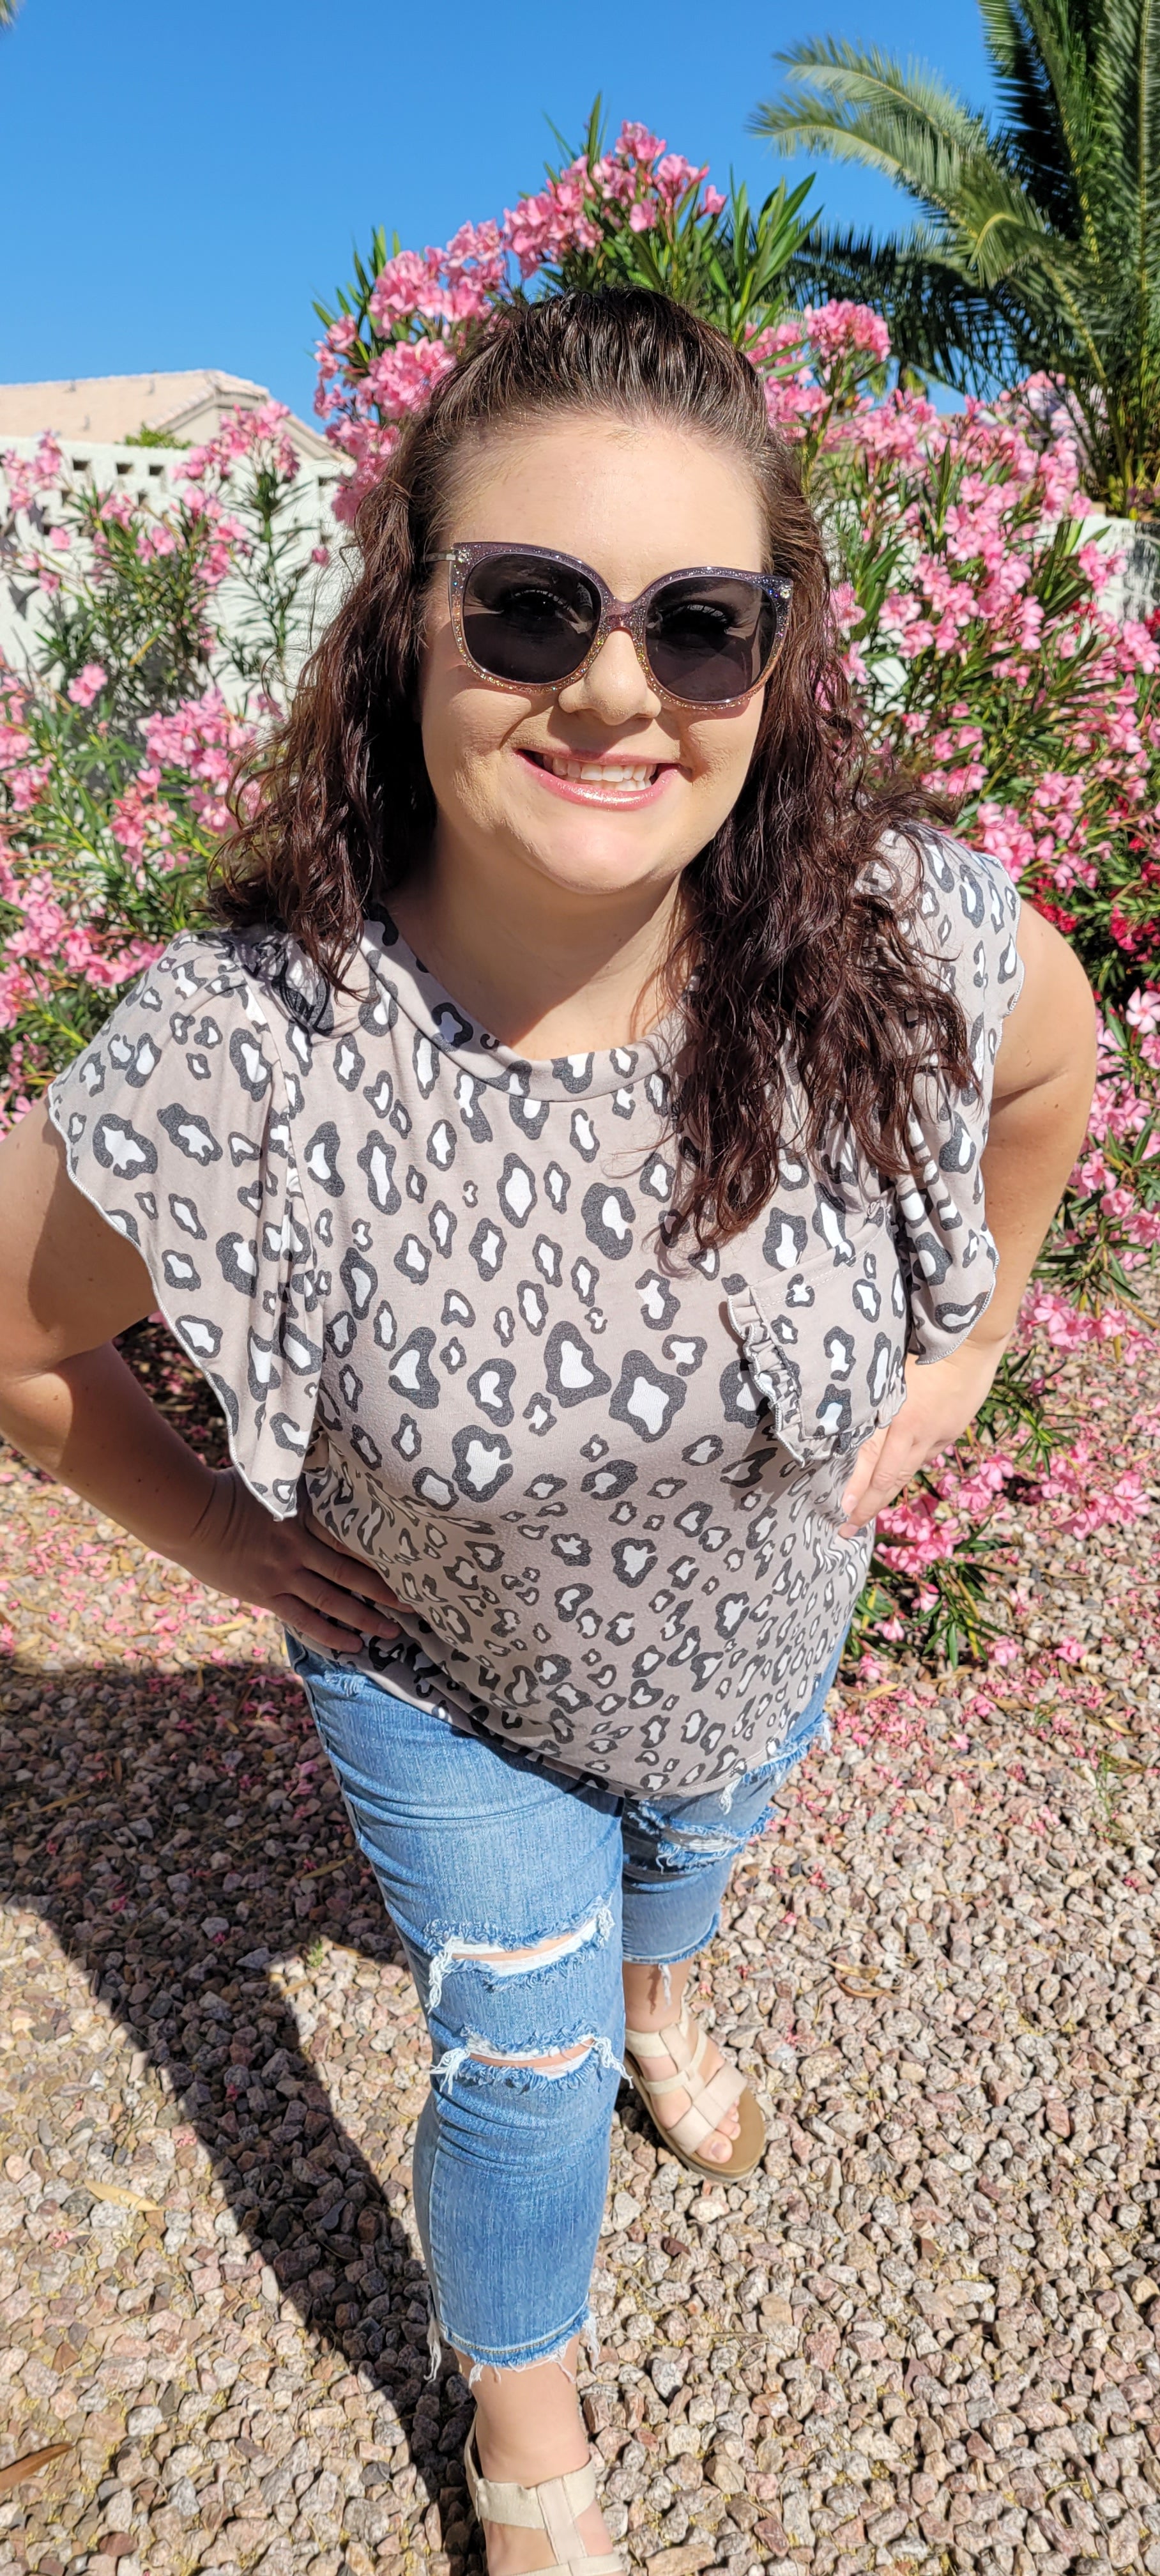 “Fearless” top features a rounded neckline, ruffled short sleeves, ruffled chest pocket, with taupe, white, and gray animal print. This top is great for vacation, those hot summer days, or a shopping day with your friends. Sizes small through large.